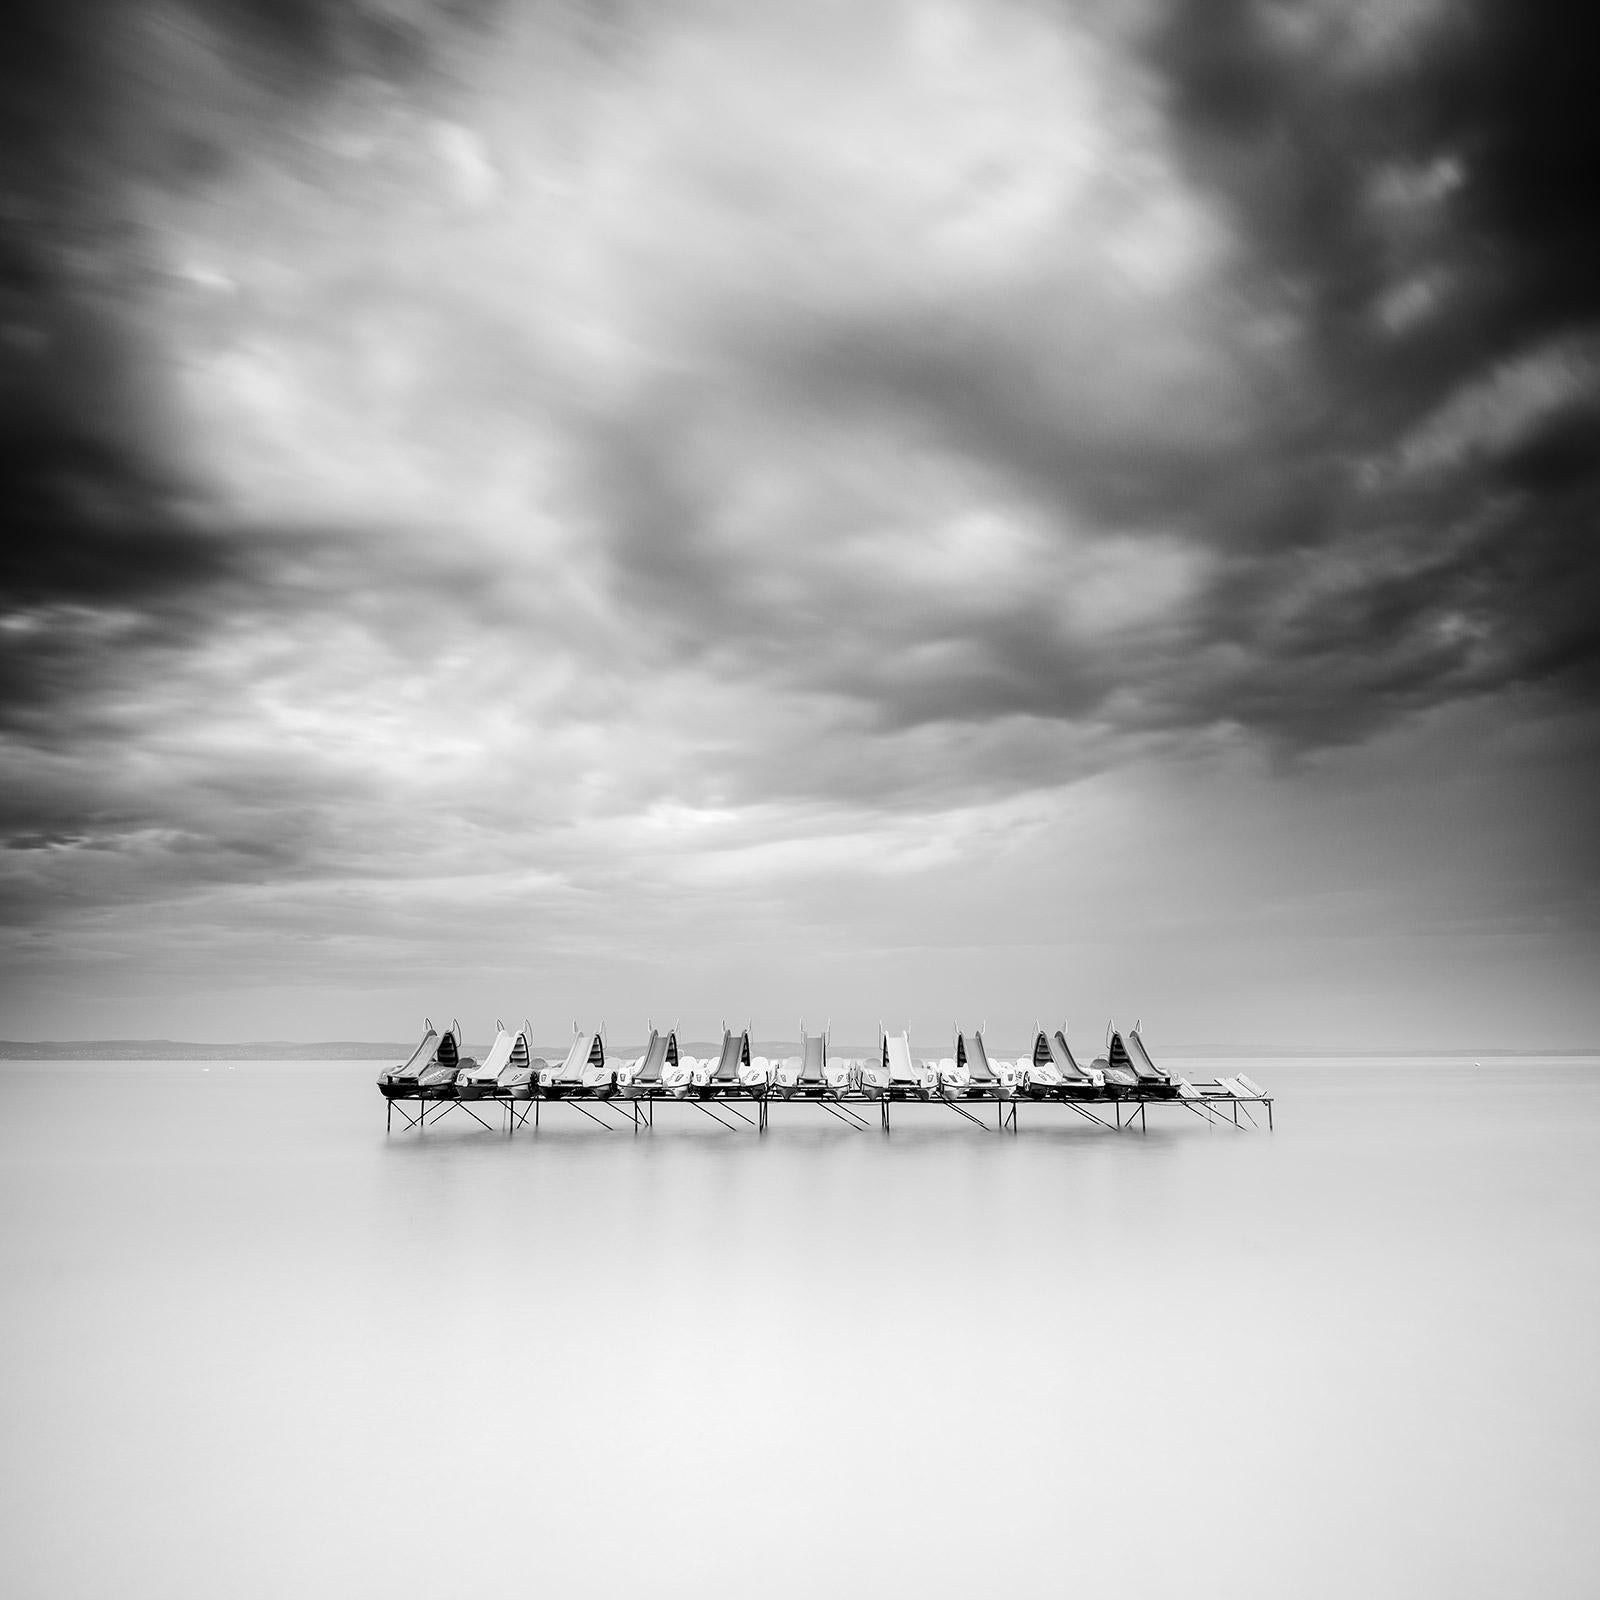 Gerald Berghammer Black and White Photograph - Paddelboot, minimalism, black and white, long exposure, waterscape photography